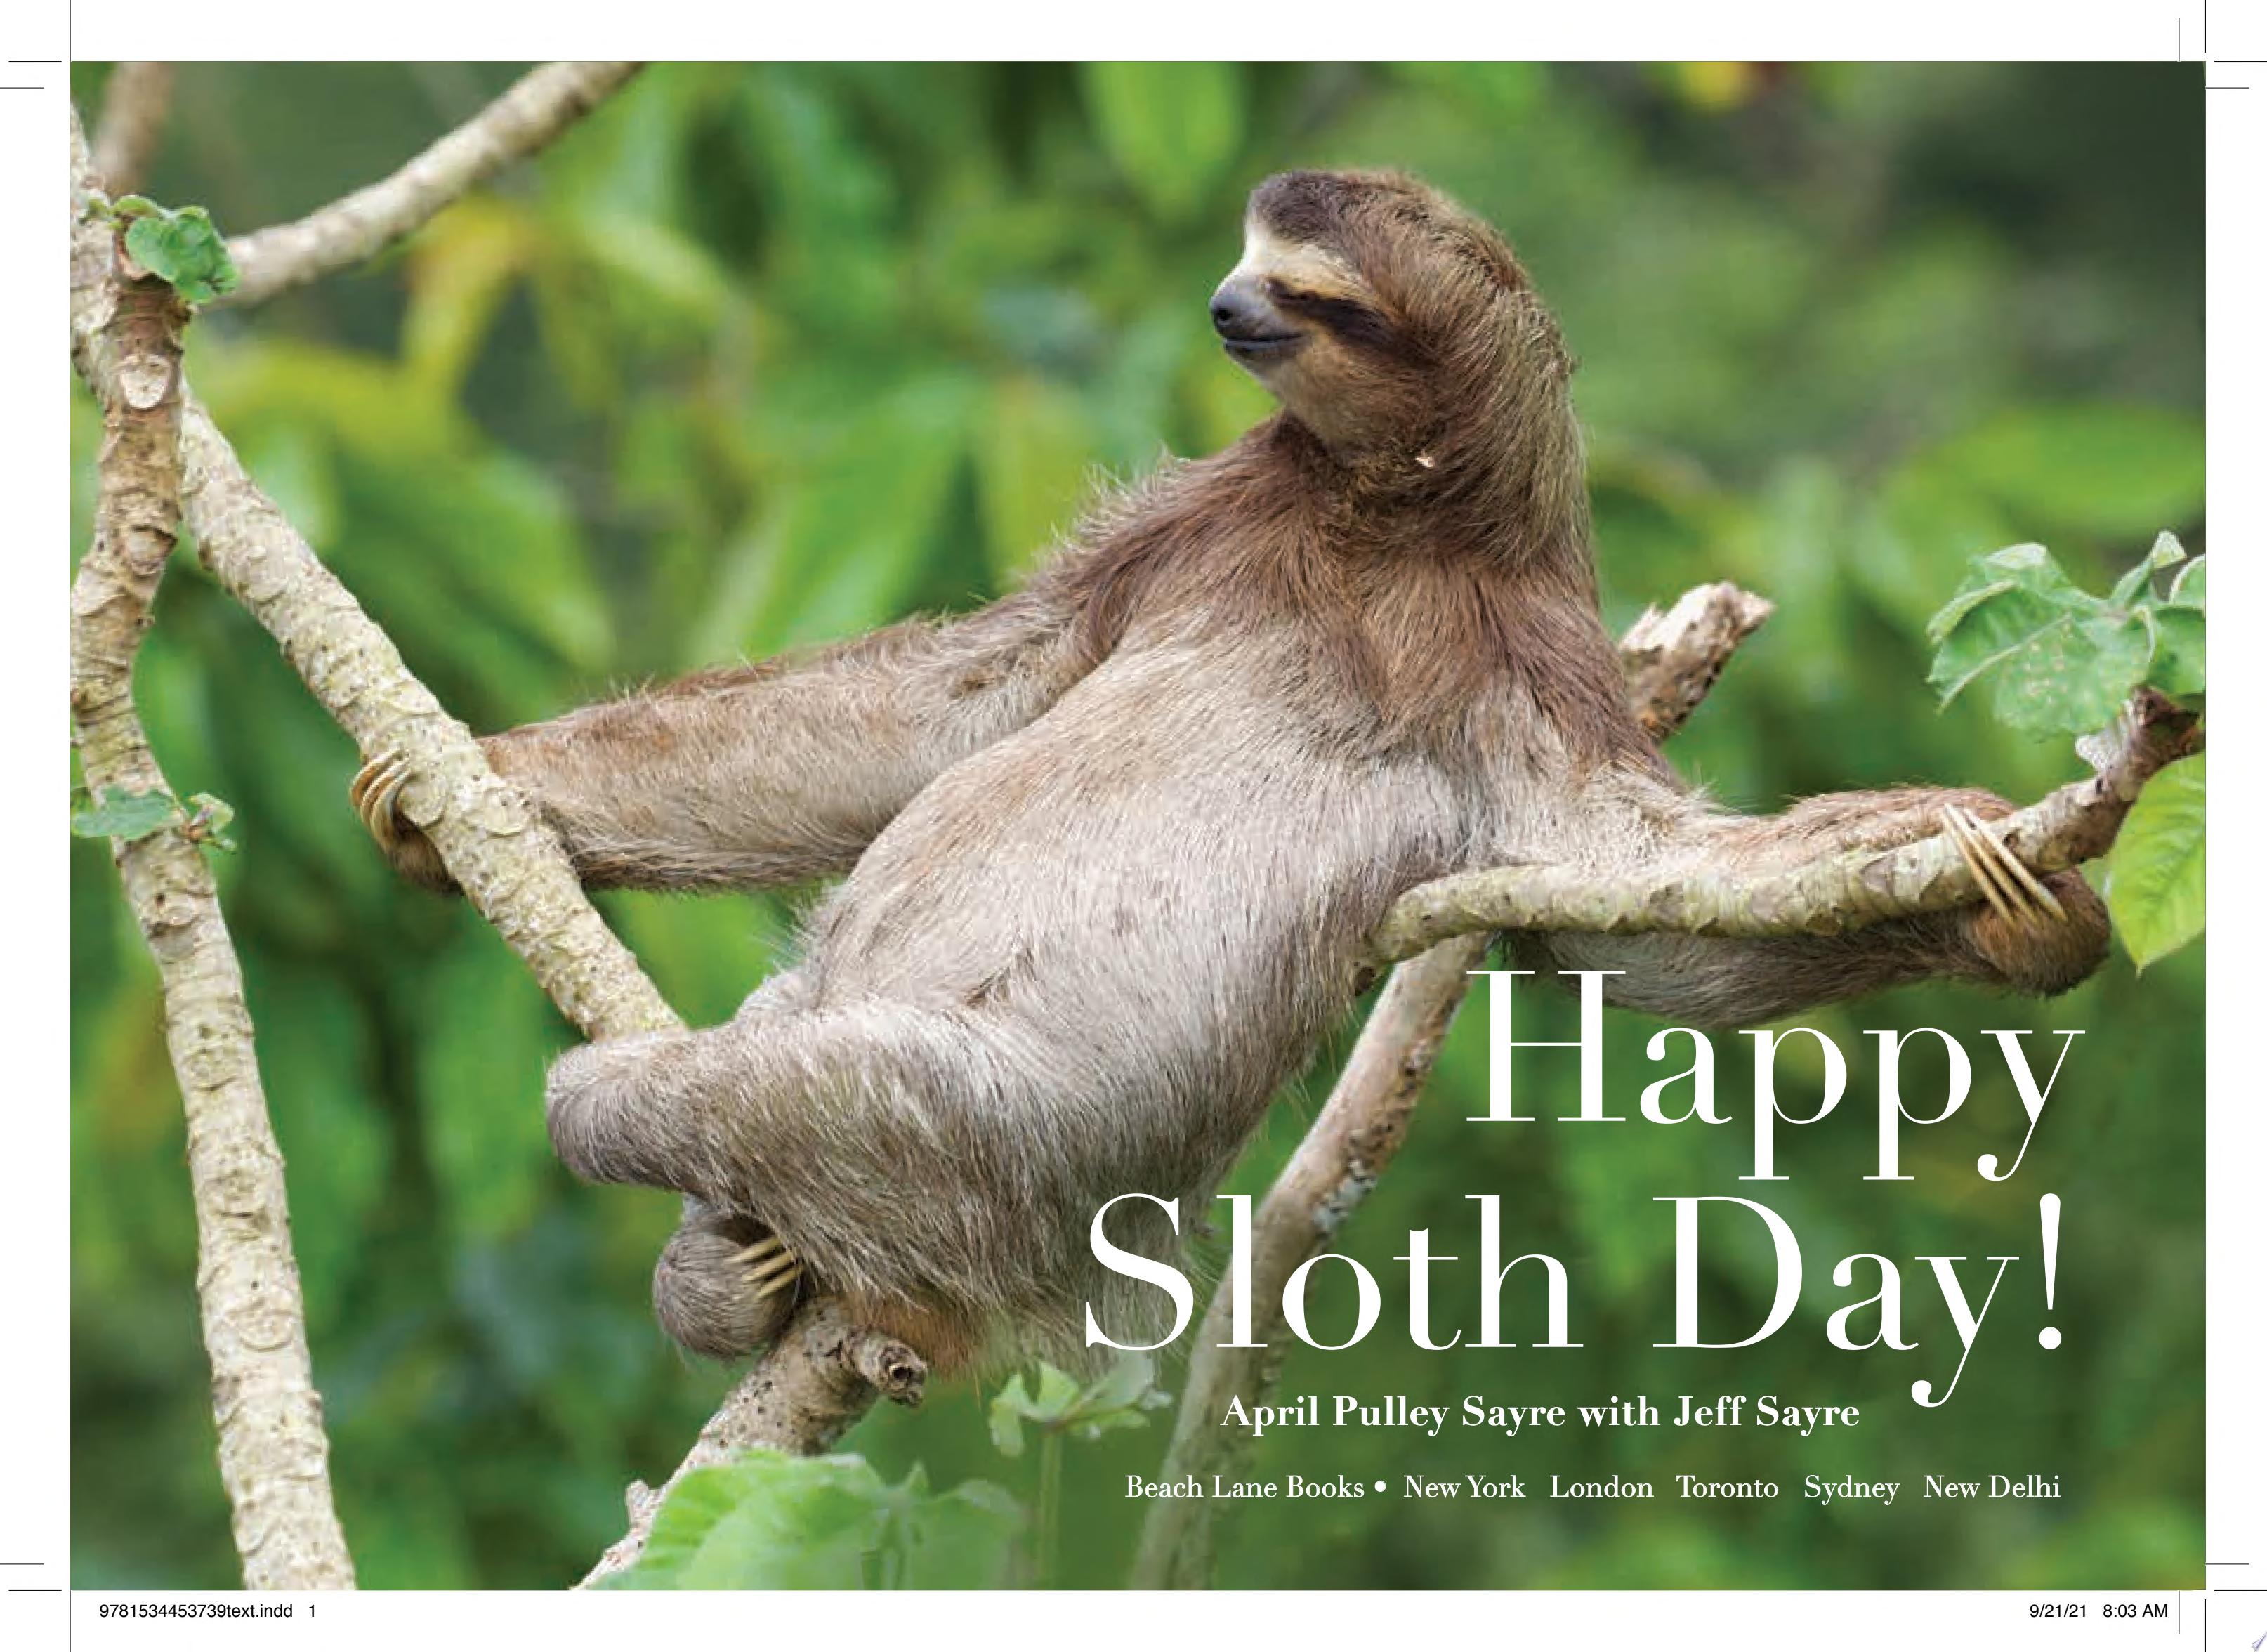 Image for "Happy Sloth Day!"